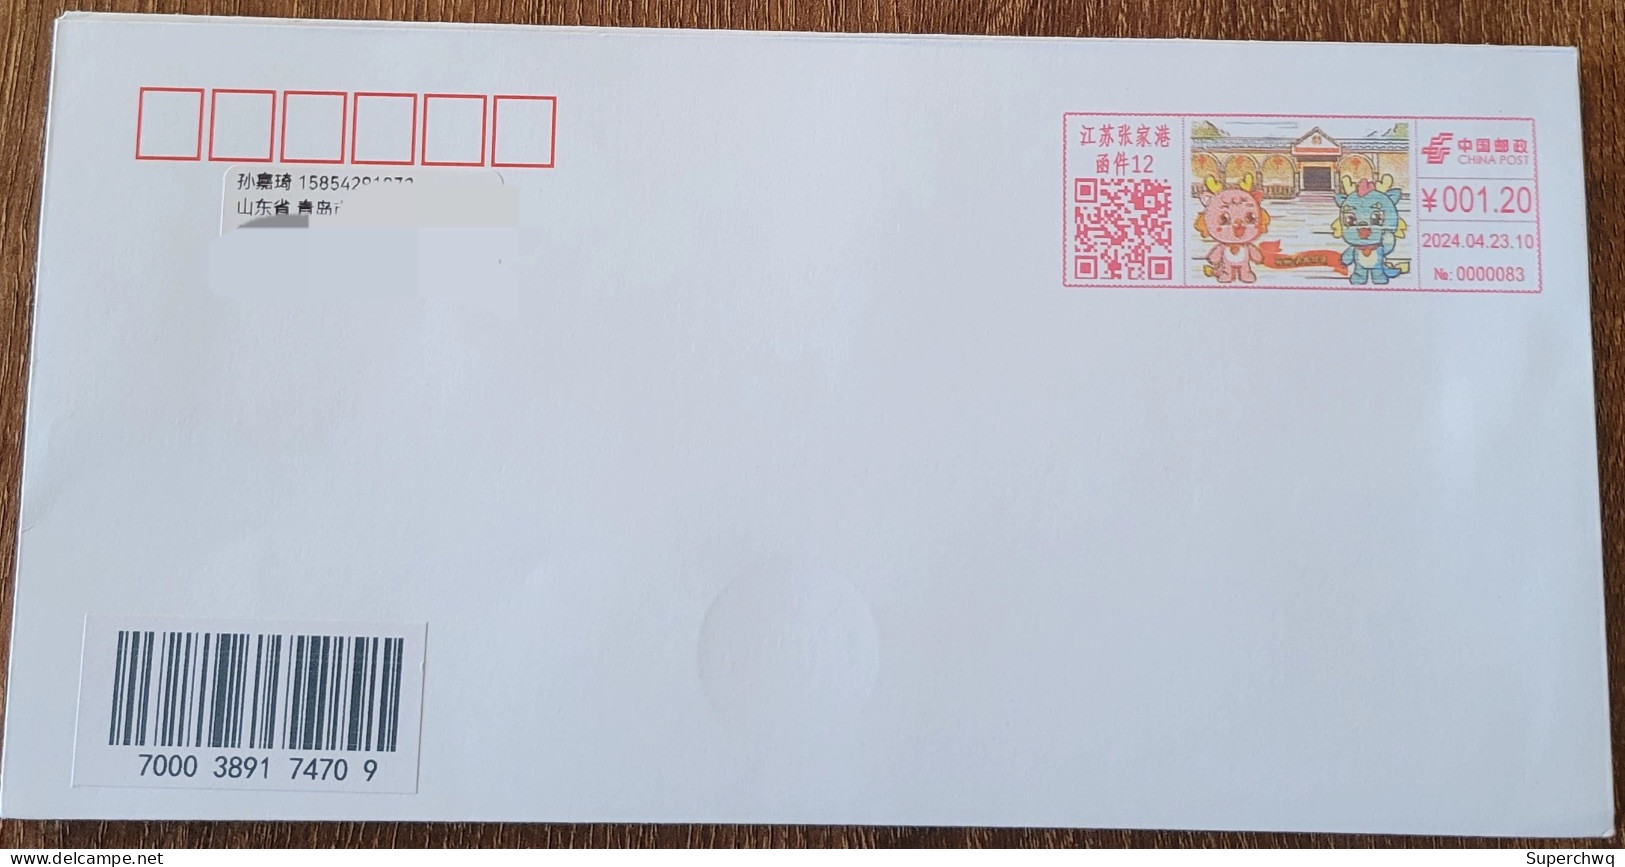 China Cover "Qinglong Community" (Zhangjiagang, Jiangsu) Colored Postage Machine Stamp First Day Actual Delivery Seal - Omslagen